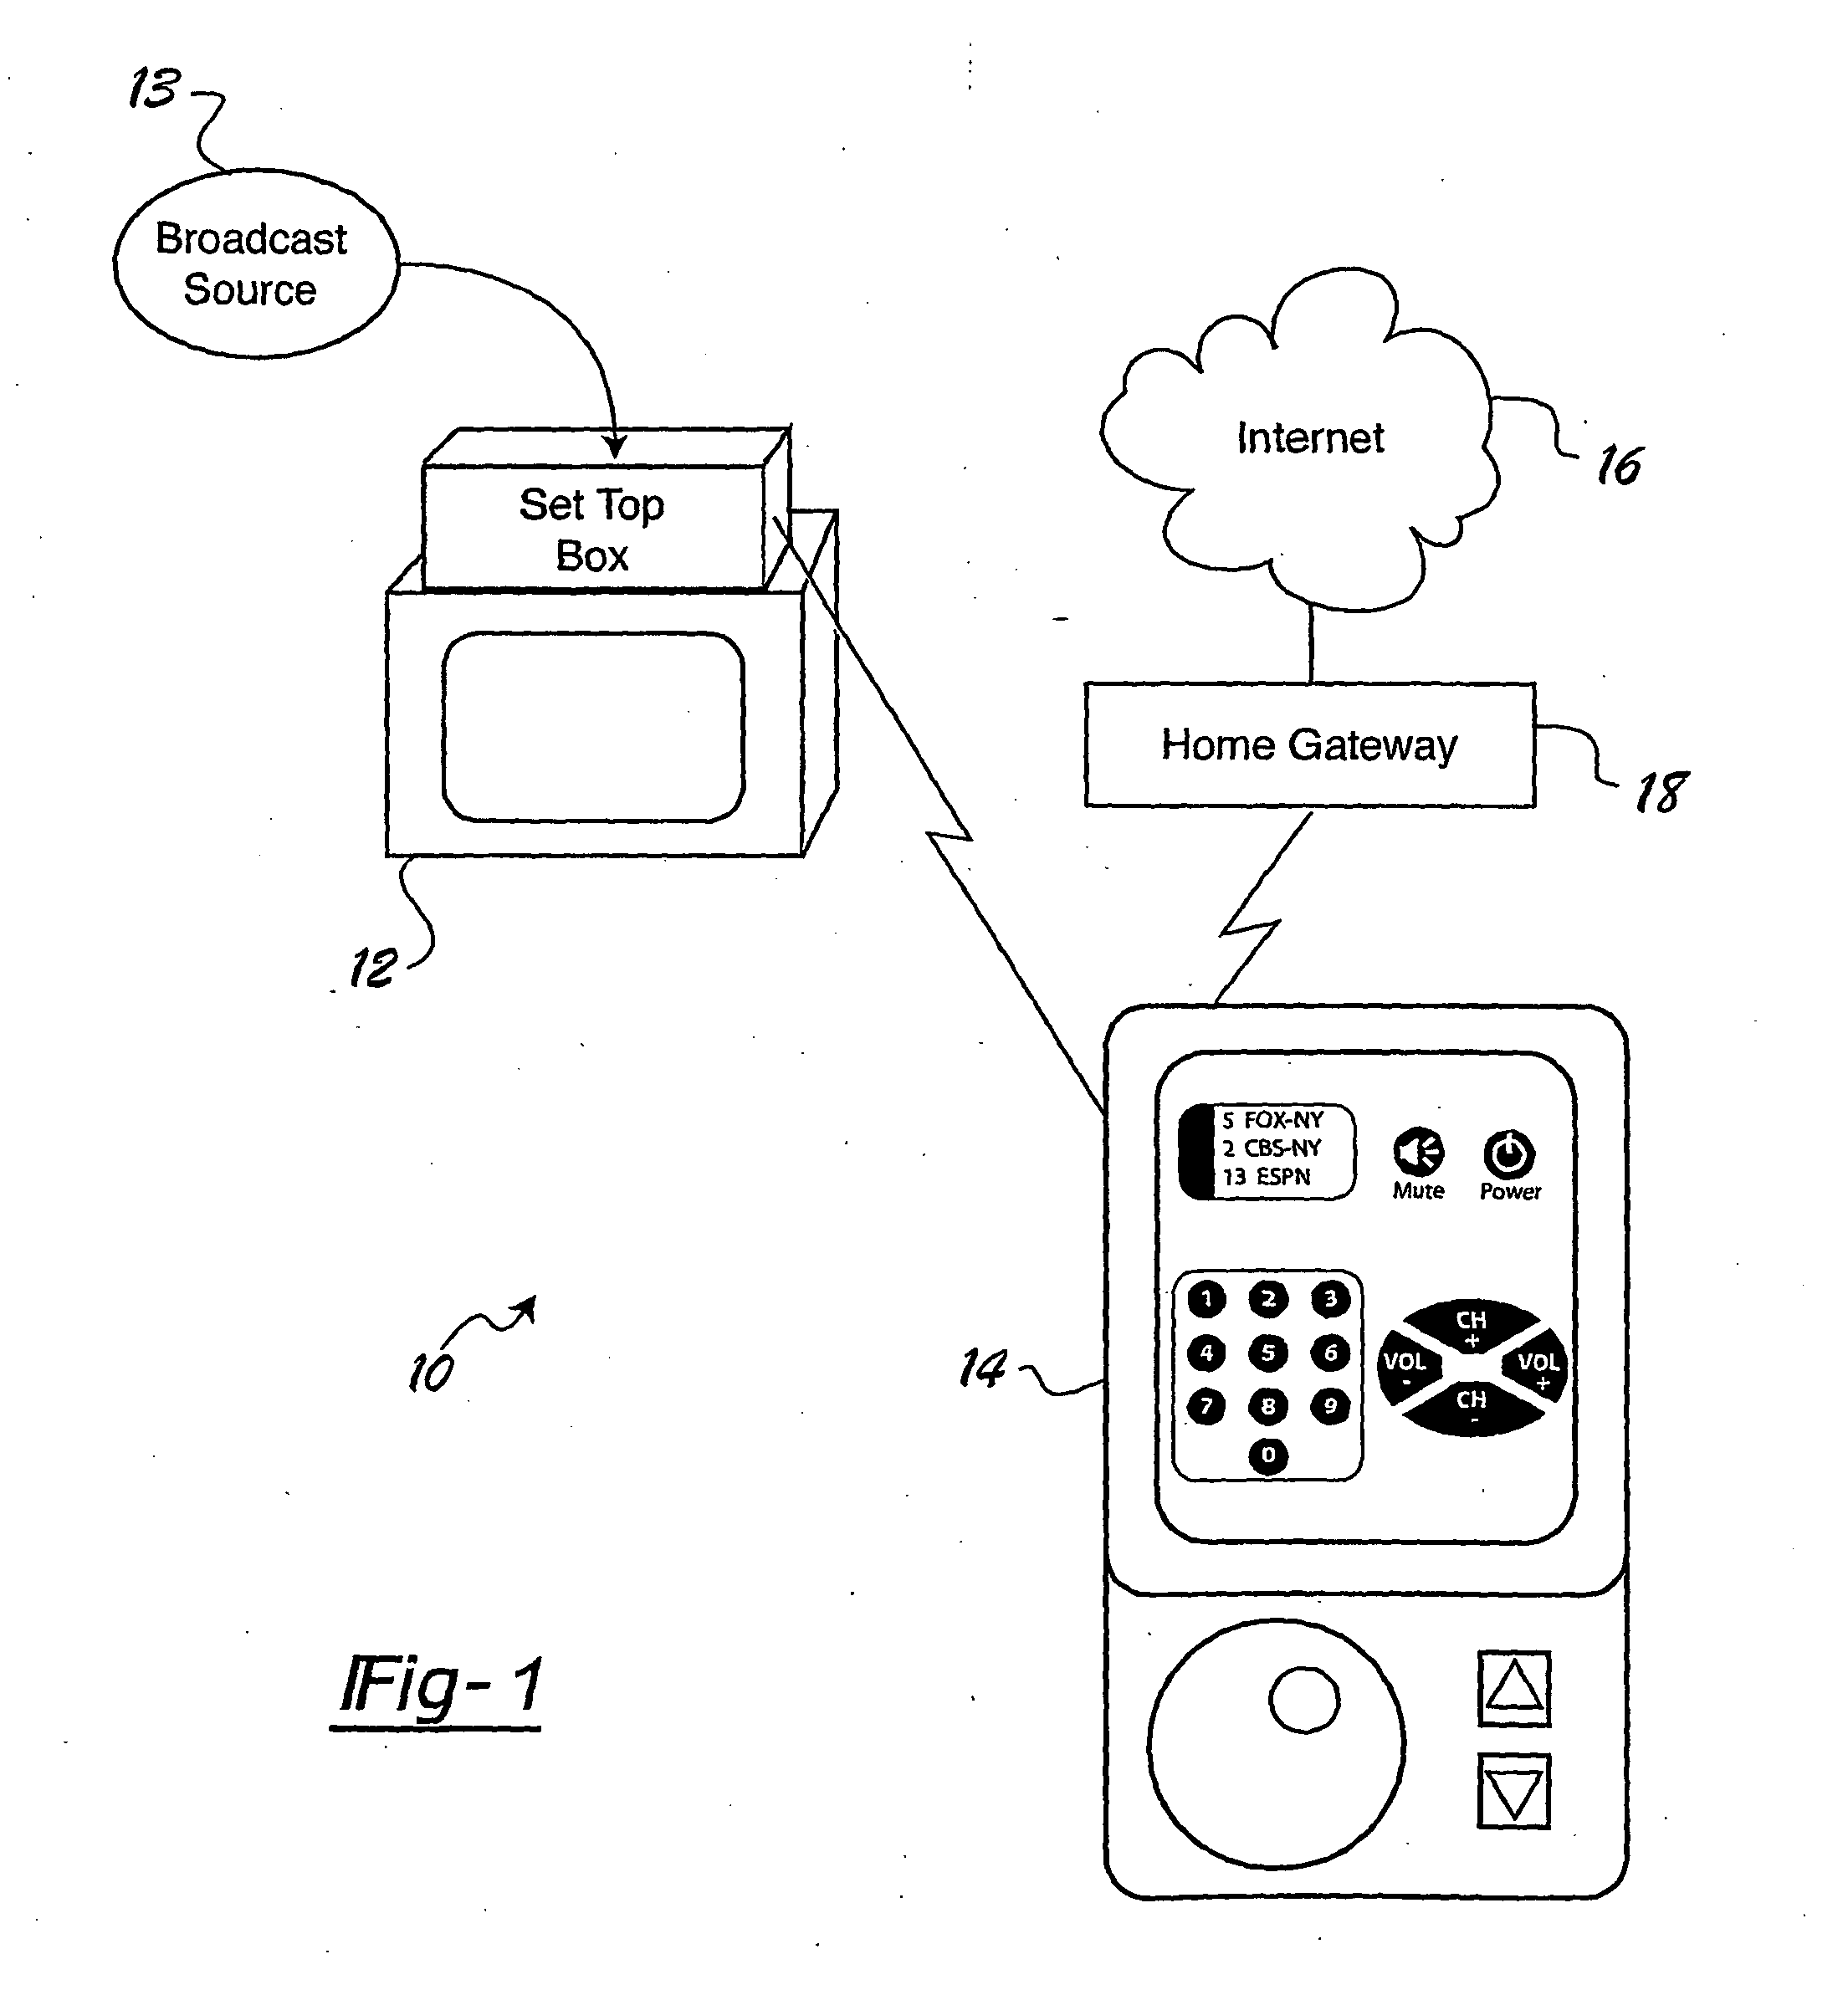 Asynchronous integration of portable handheld device